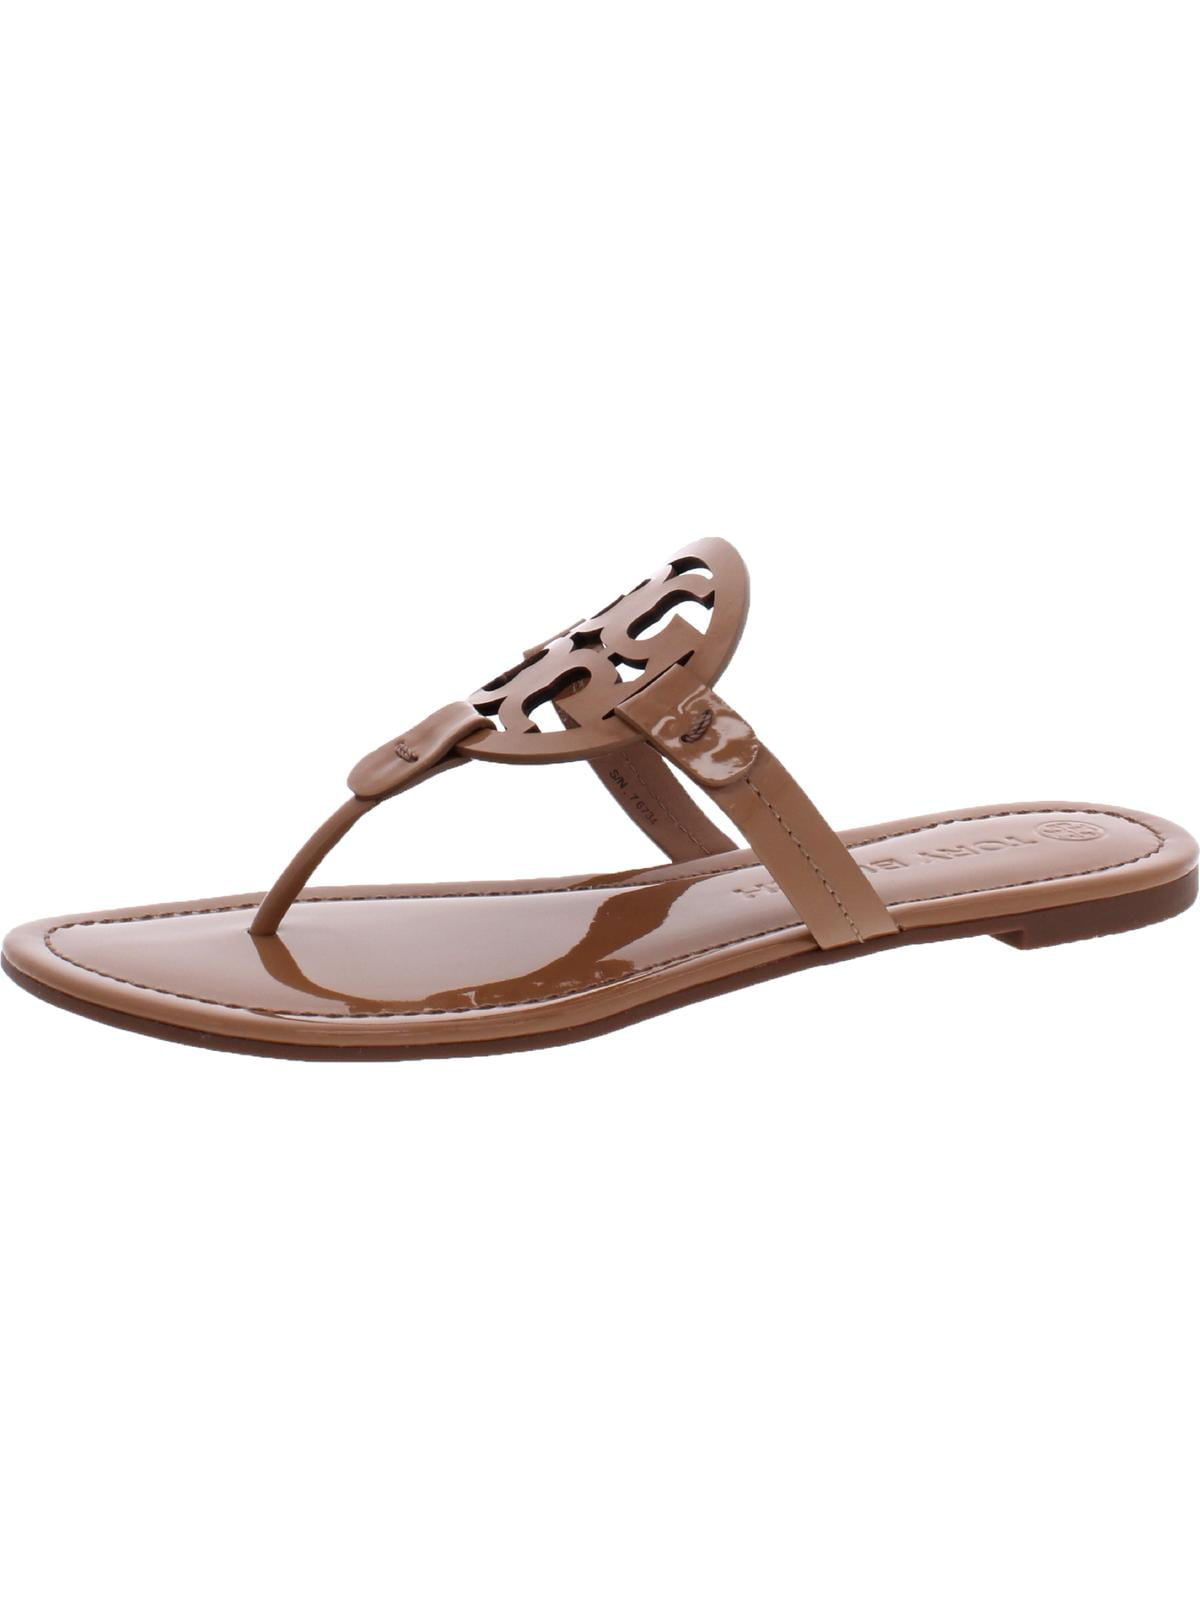 Tory Burch Womens Miller Patent Leather T-Strap Thong Sandals 